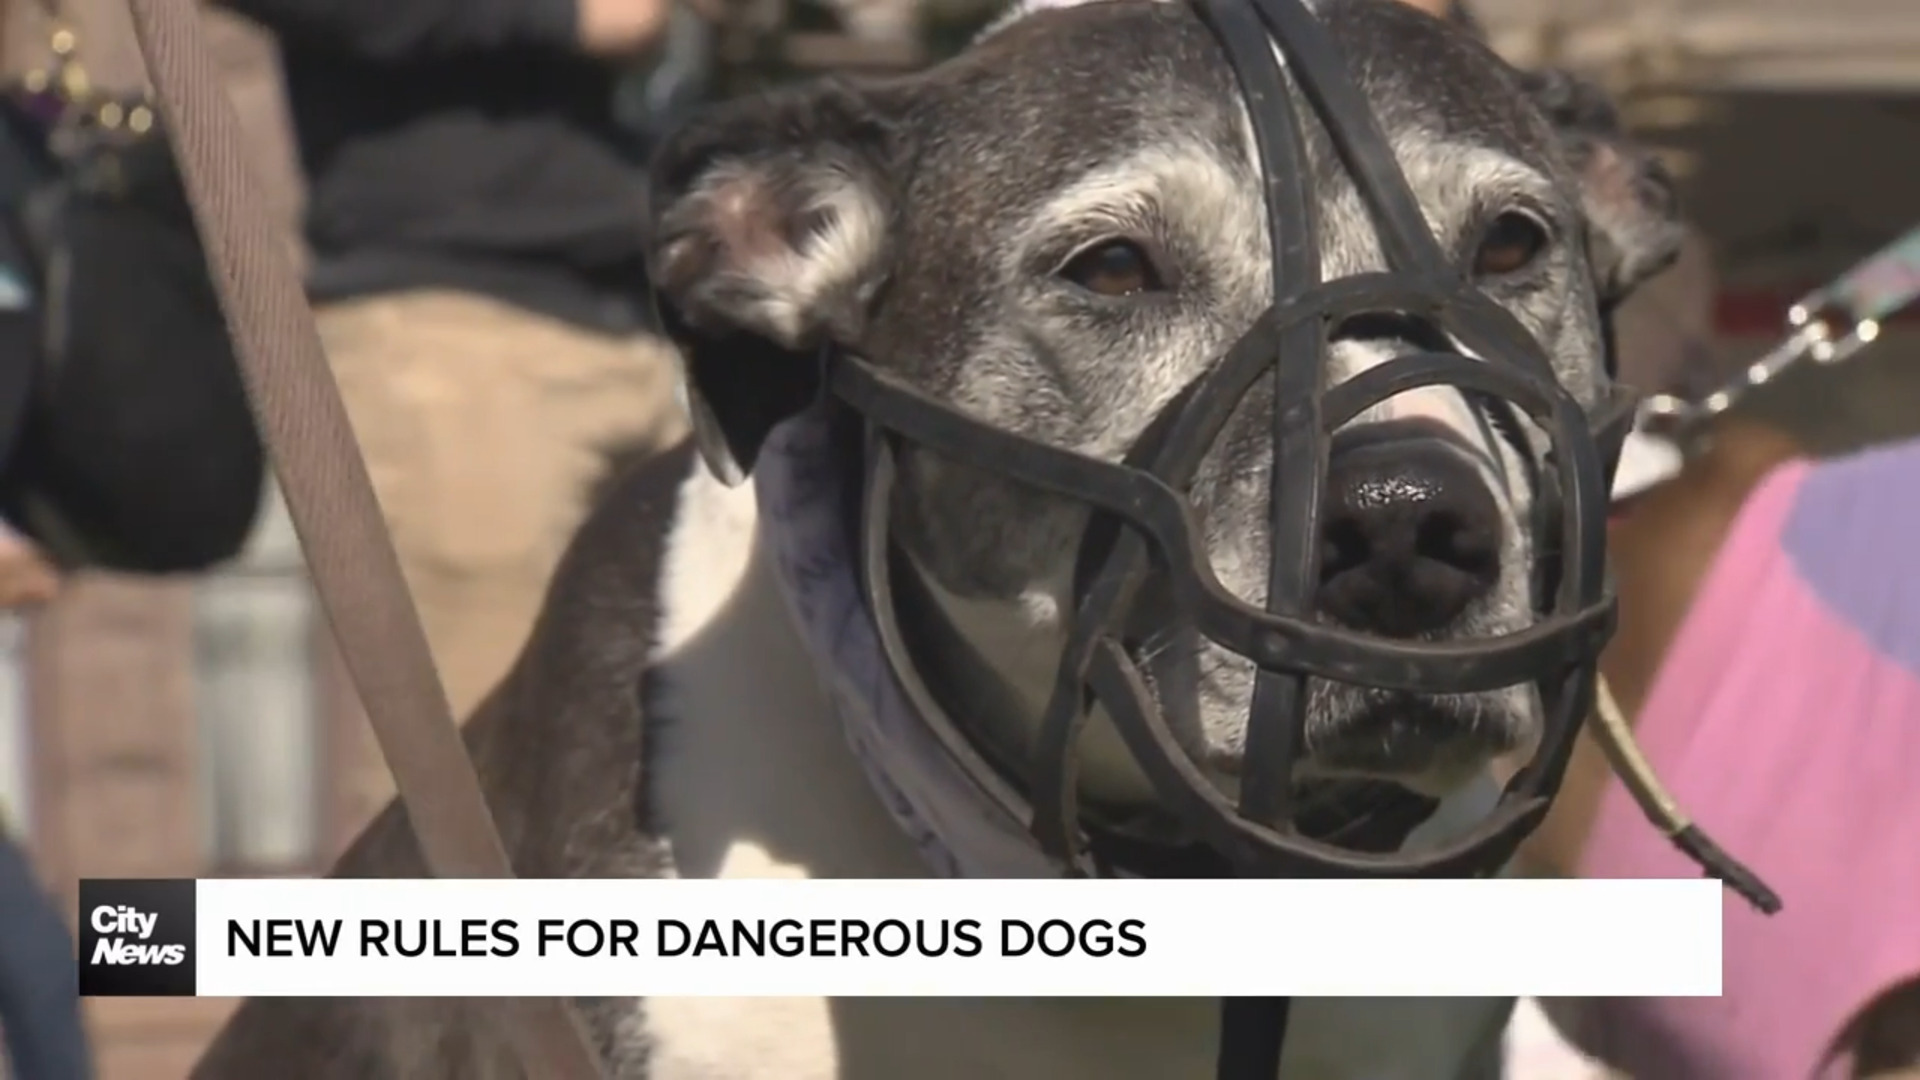 City ramps up rules for dangerous dogs